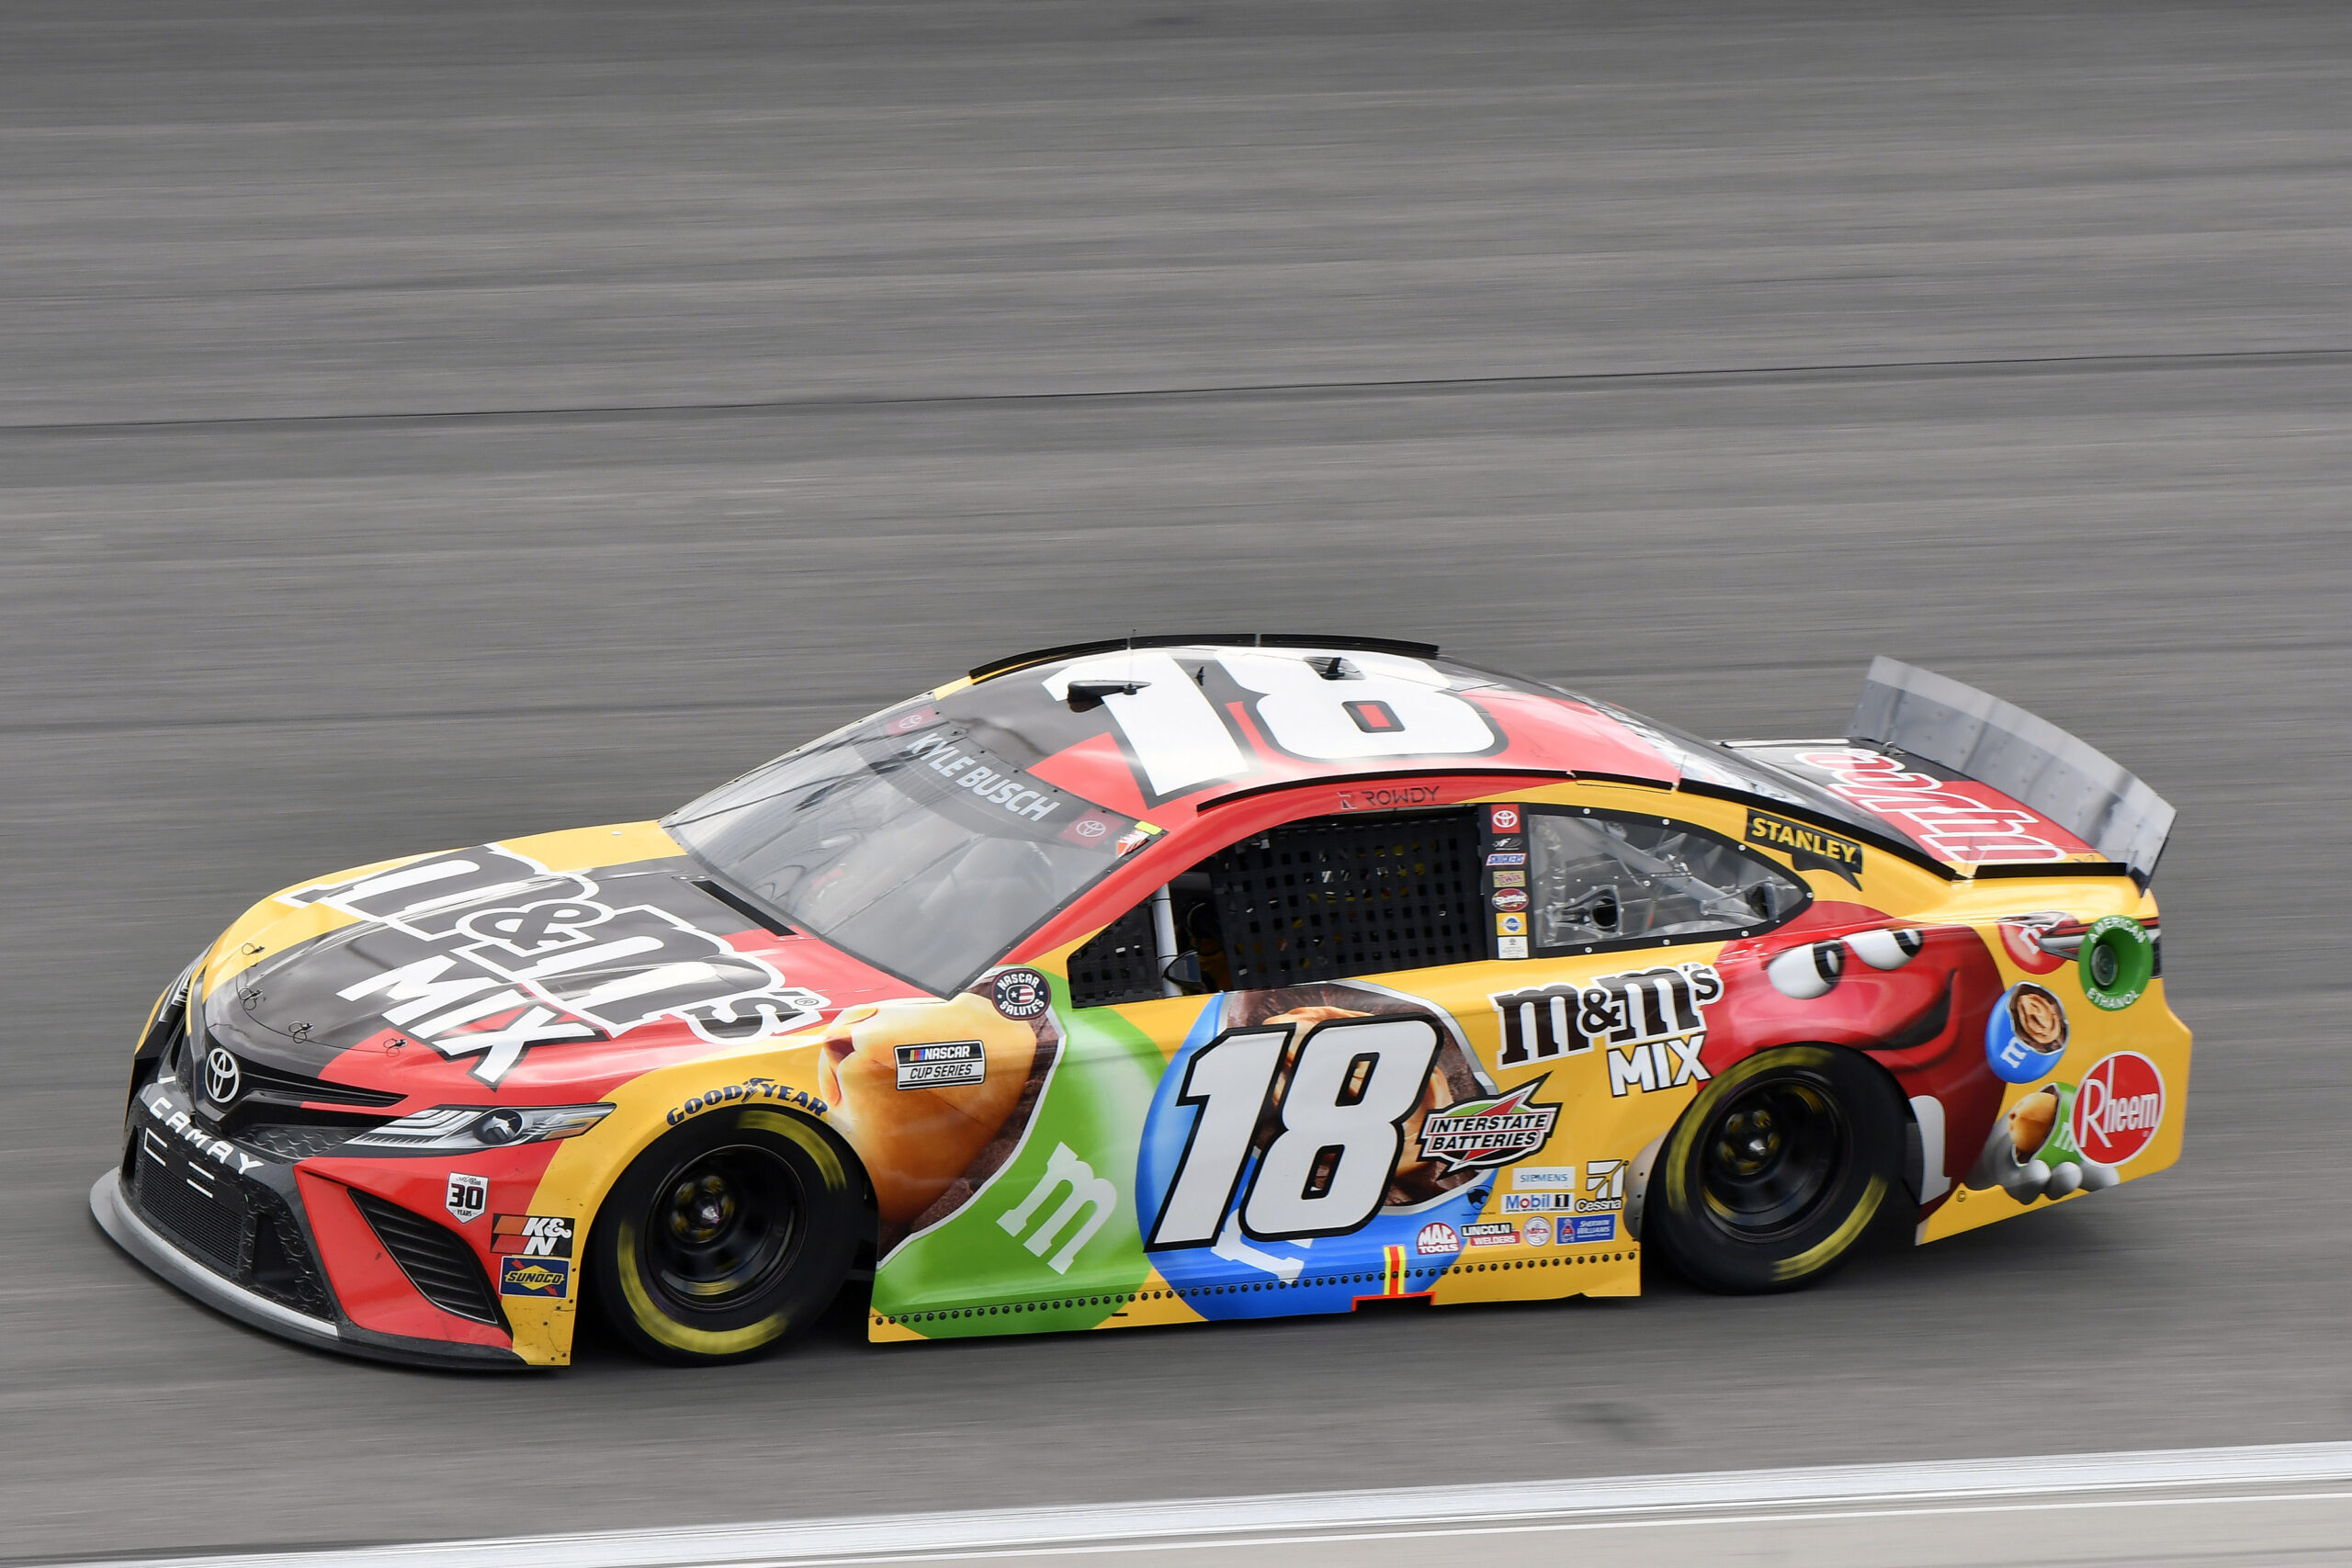 On the whole, Kyle Busch has faith in his No. 18 team's ability to gel as this year progresses. (Photo: Joe Gibbs Racing)